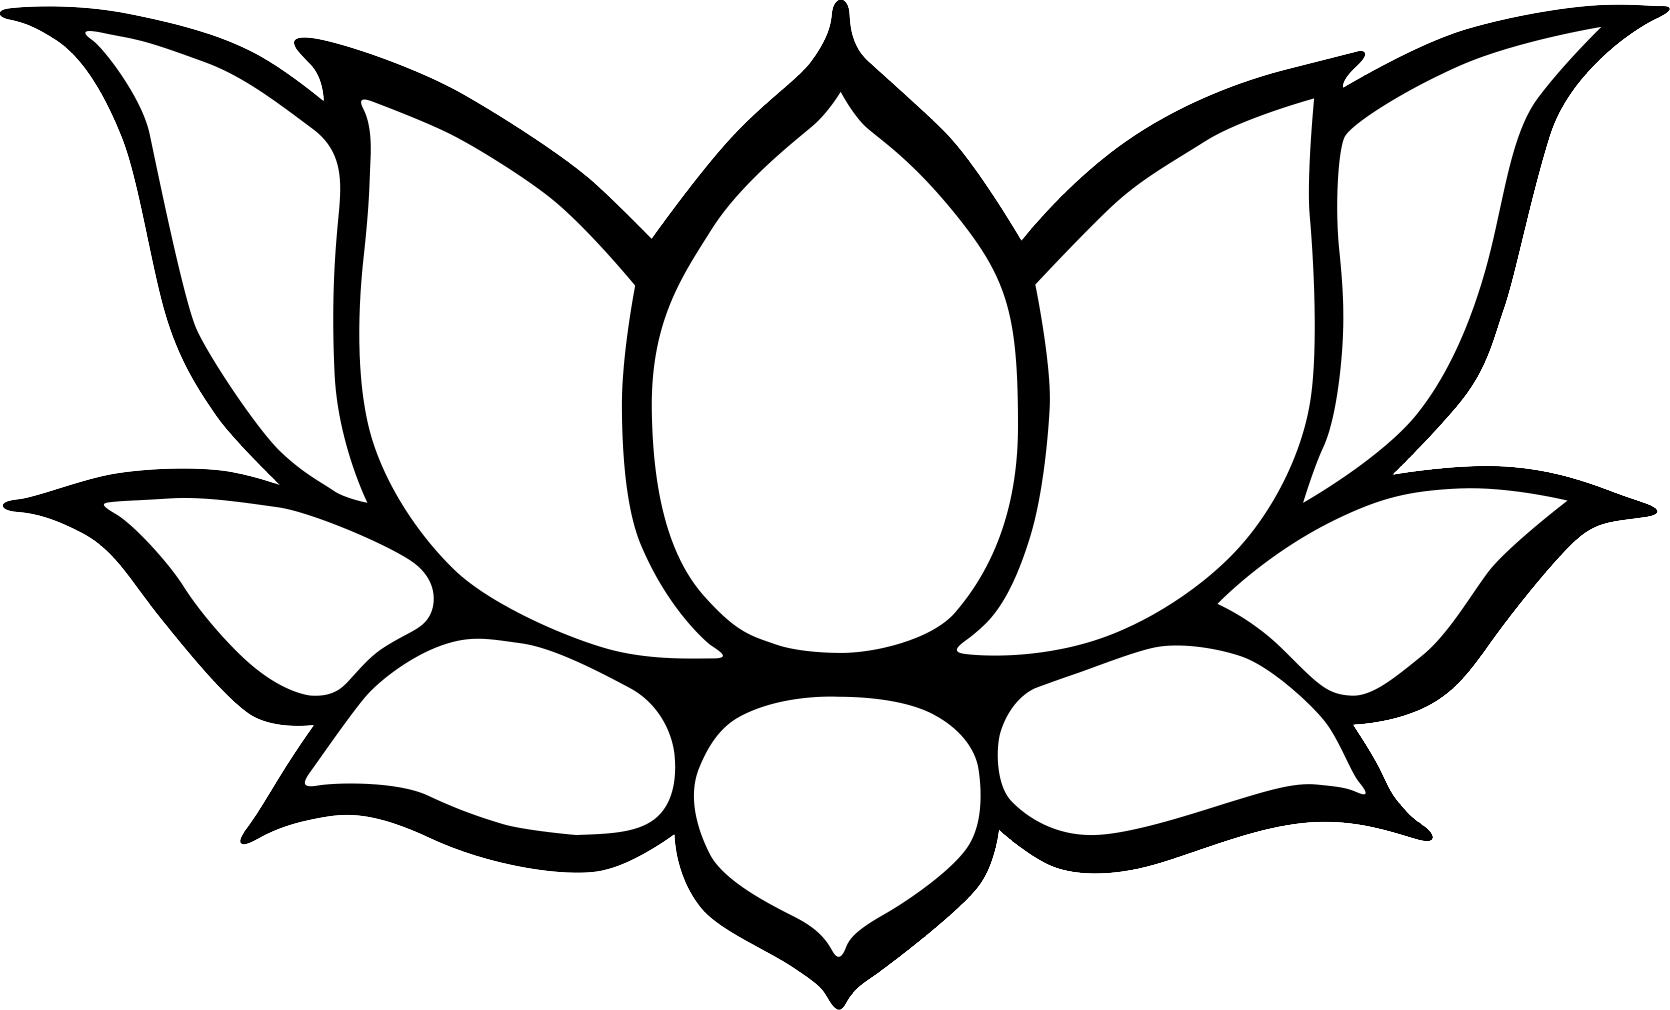 How To Draw A Lotus Flower: A Step-by-Step Guide | by Easy Draw For Kids |  Medium